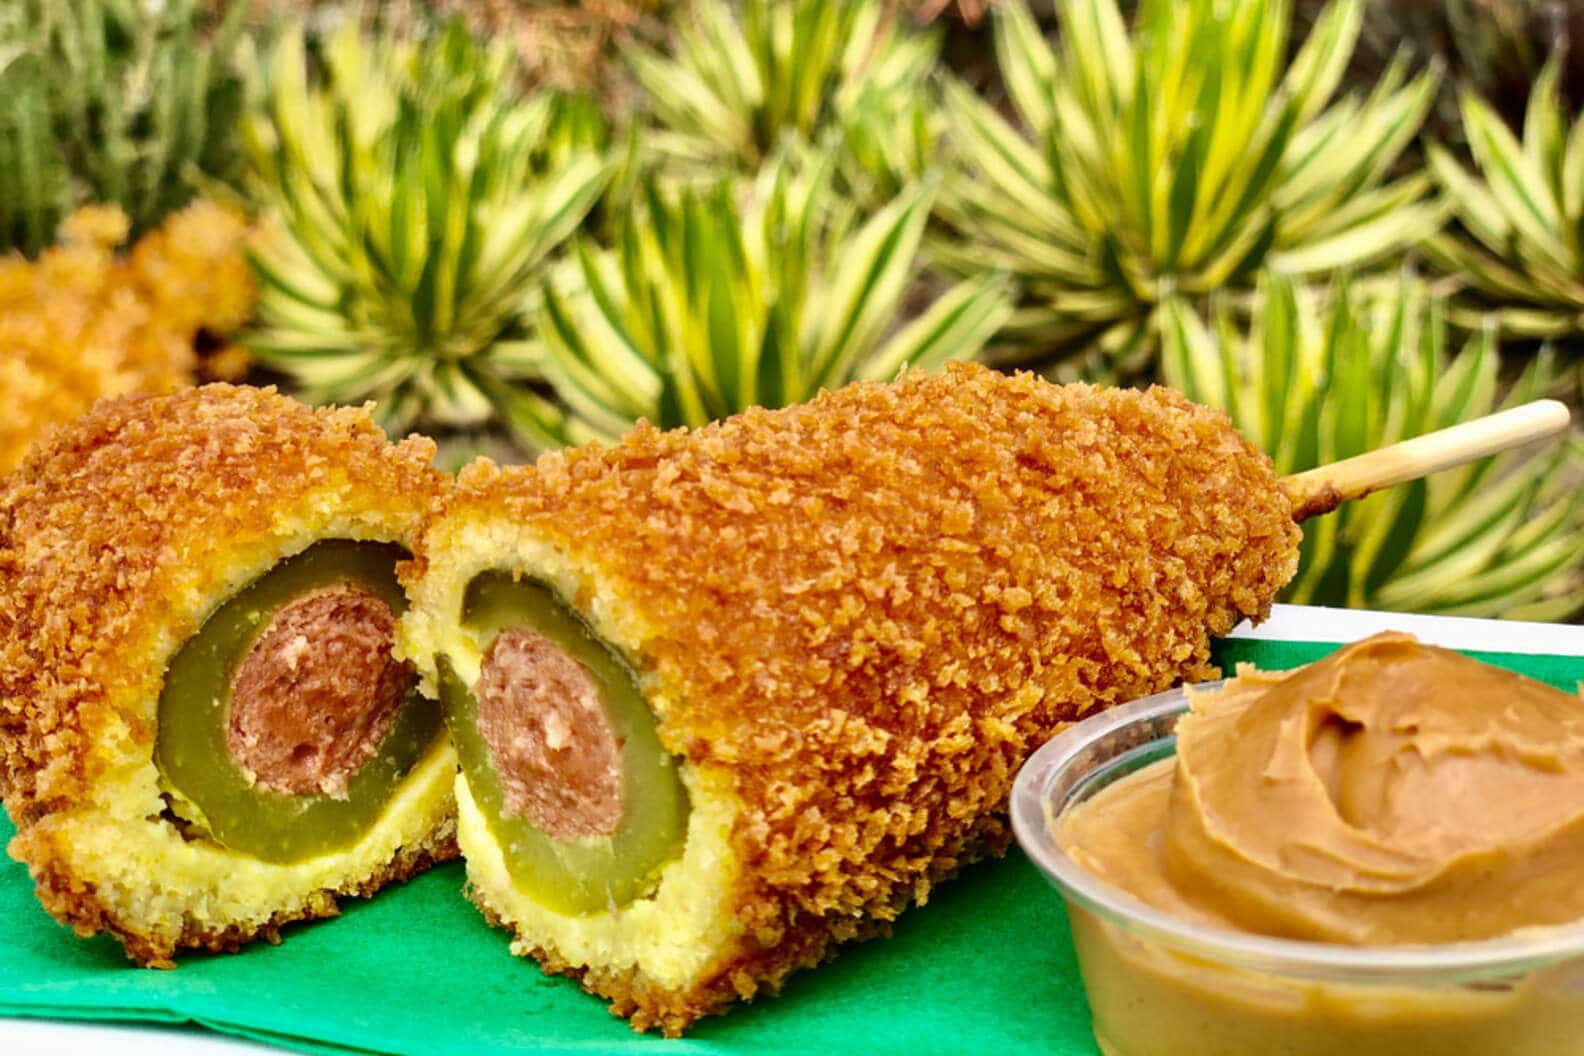 A fried pickle corn dog next to peanut butter.